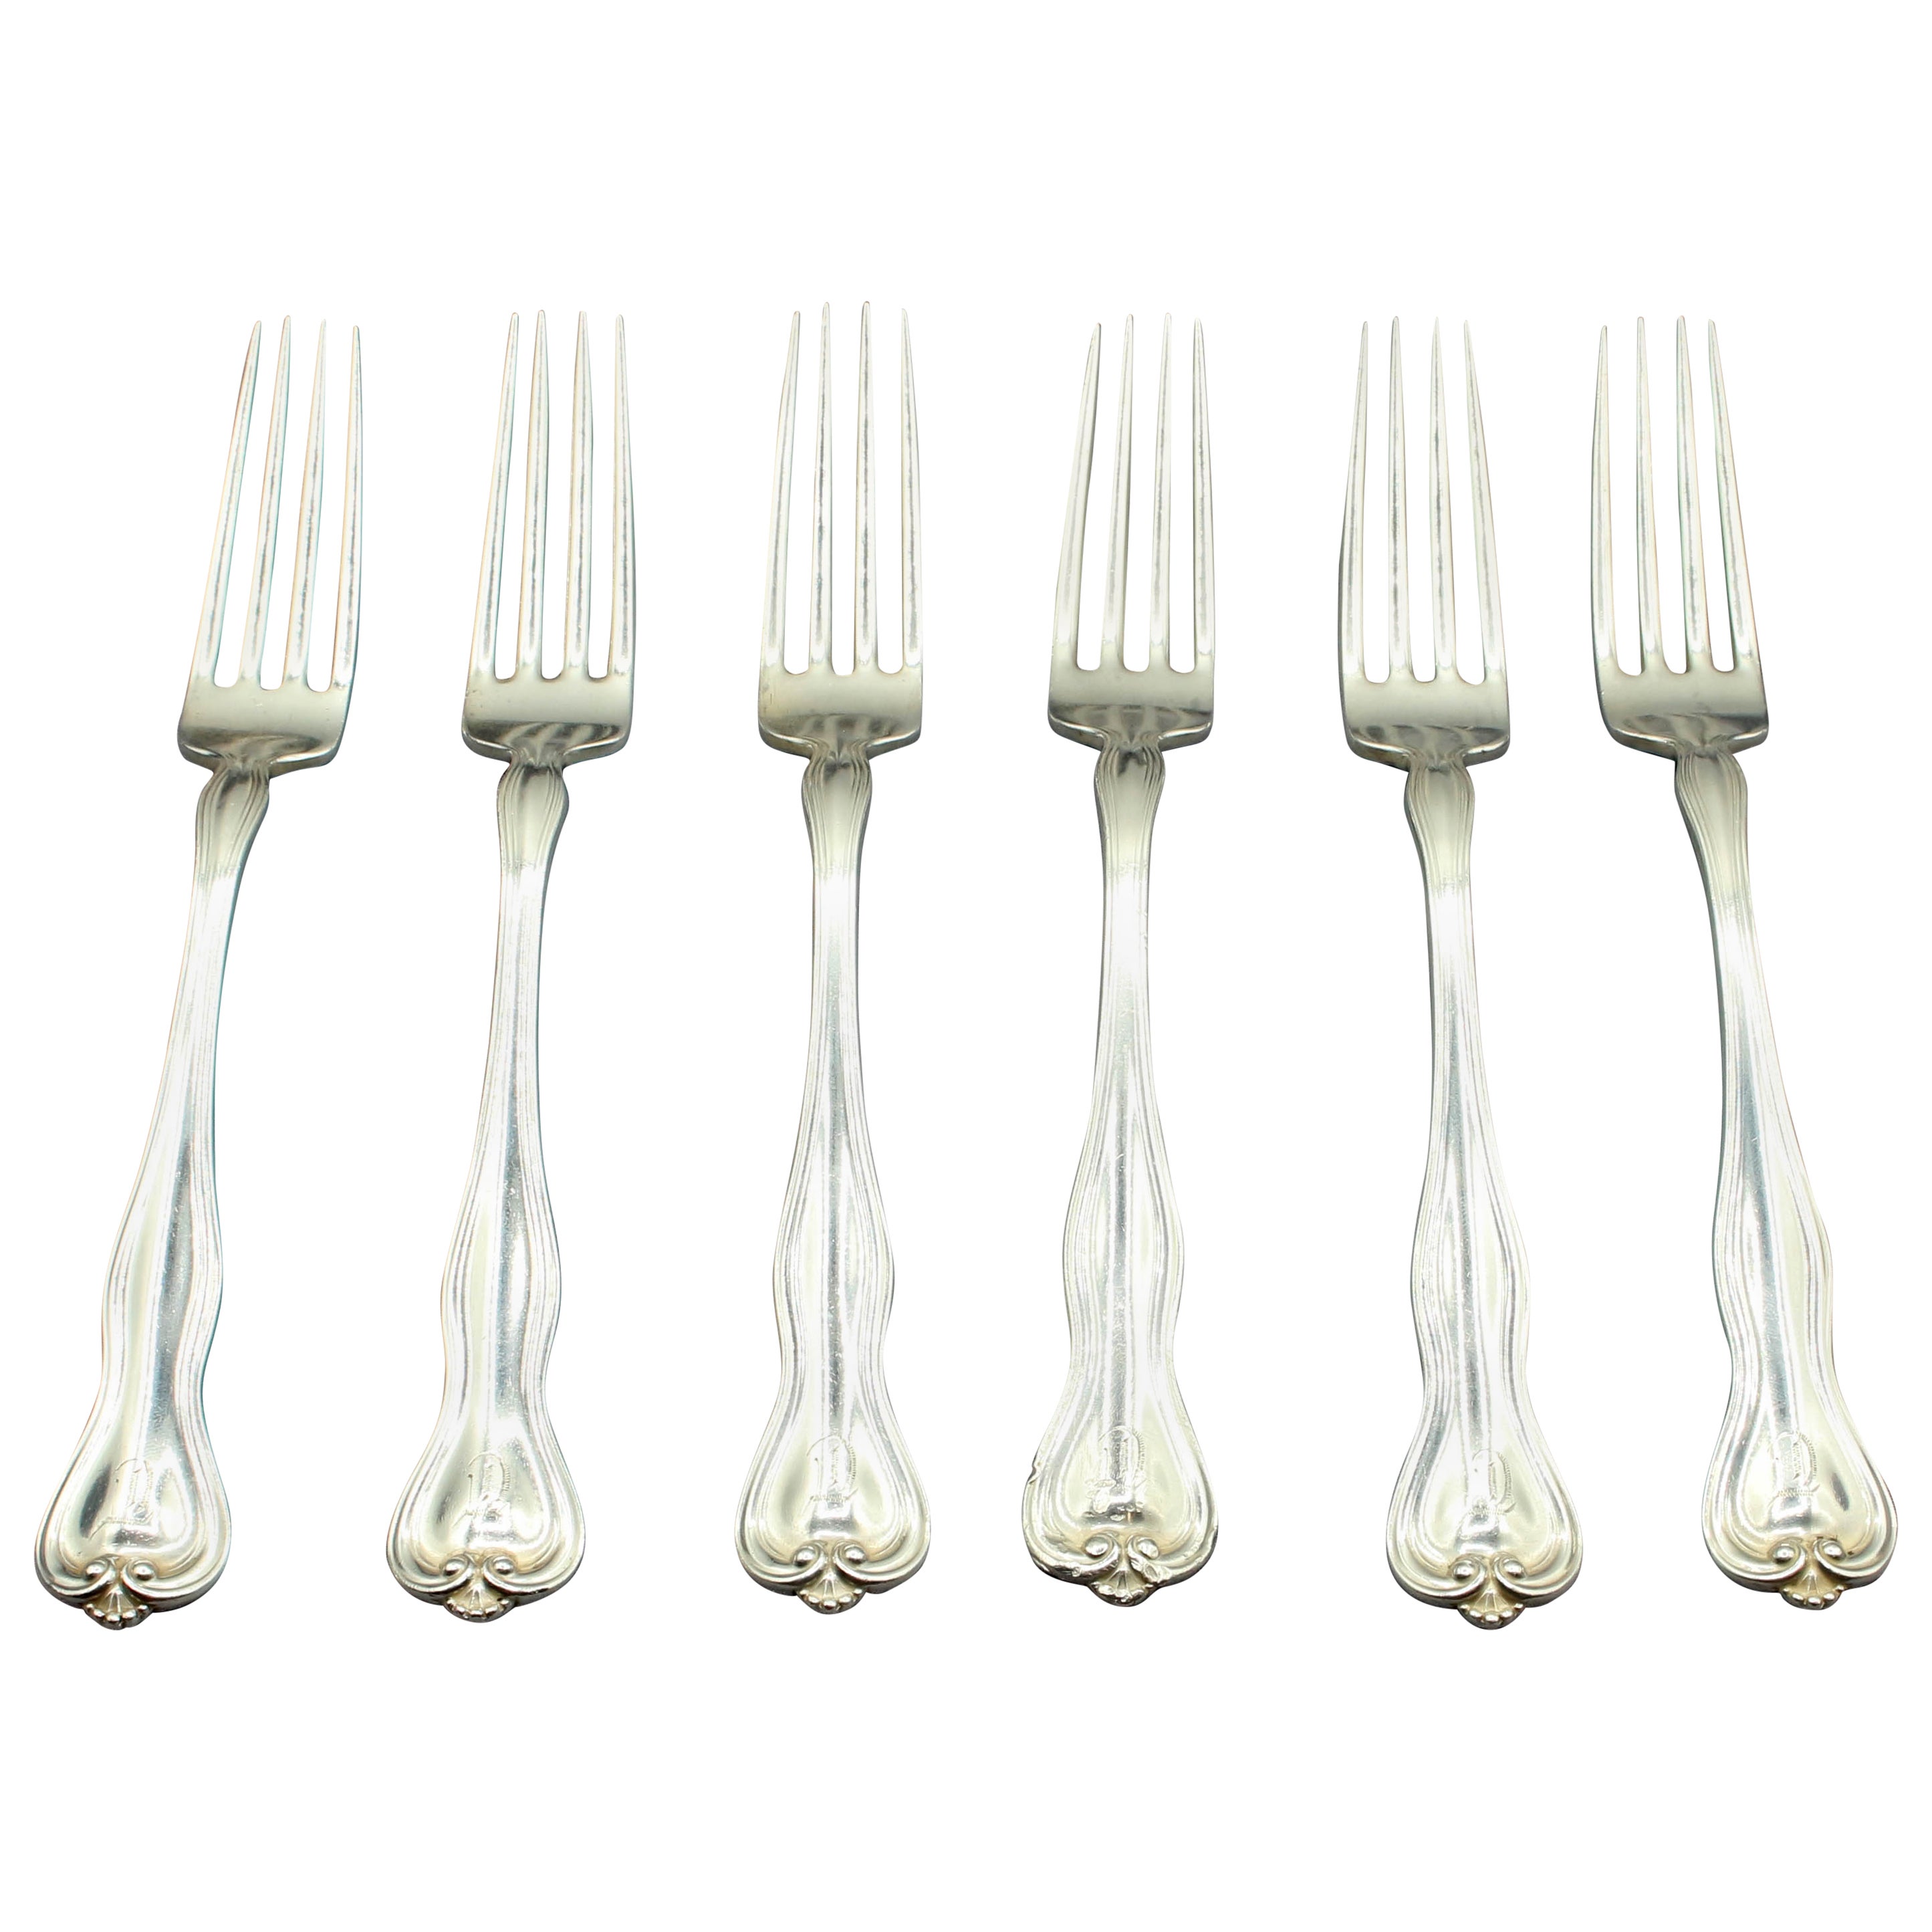 Set of 6 Sterling Silver Forks by Watson